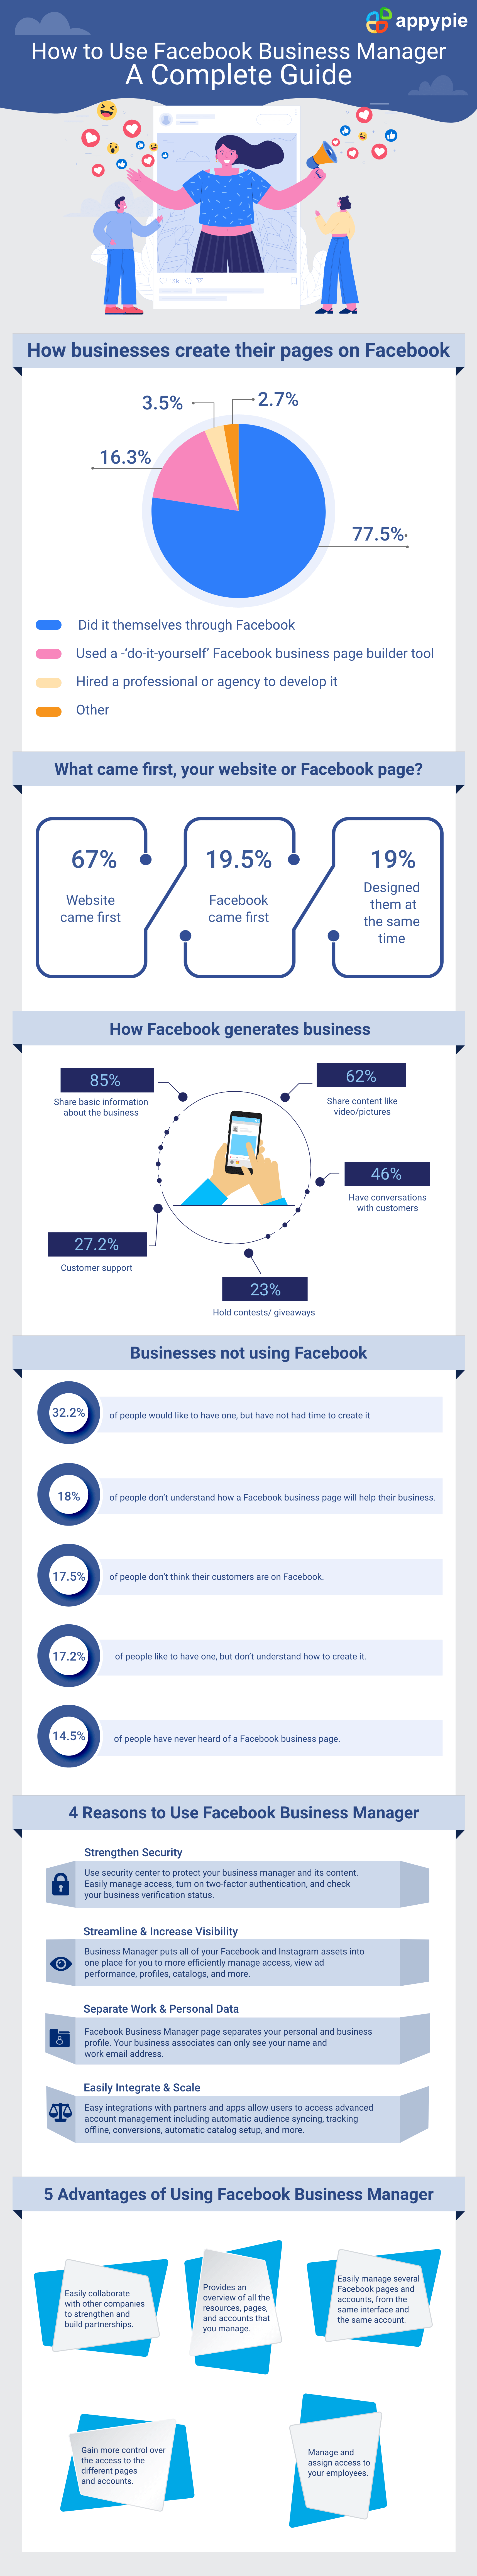 Facebook Business Manager Account (Appy Pie)